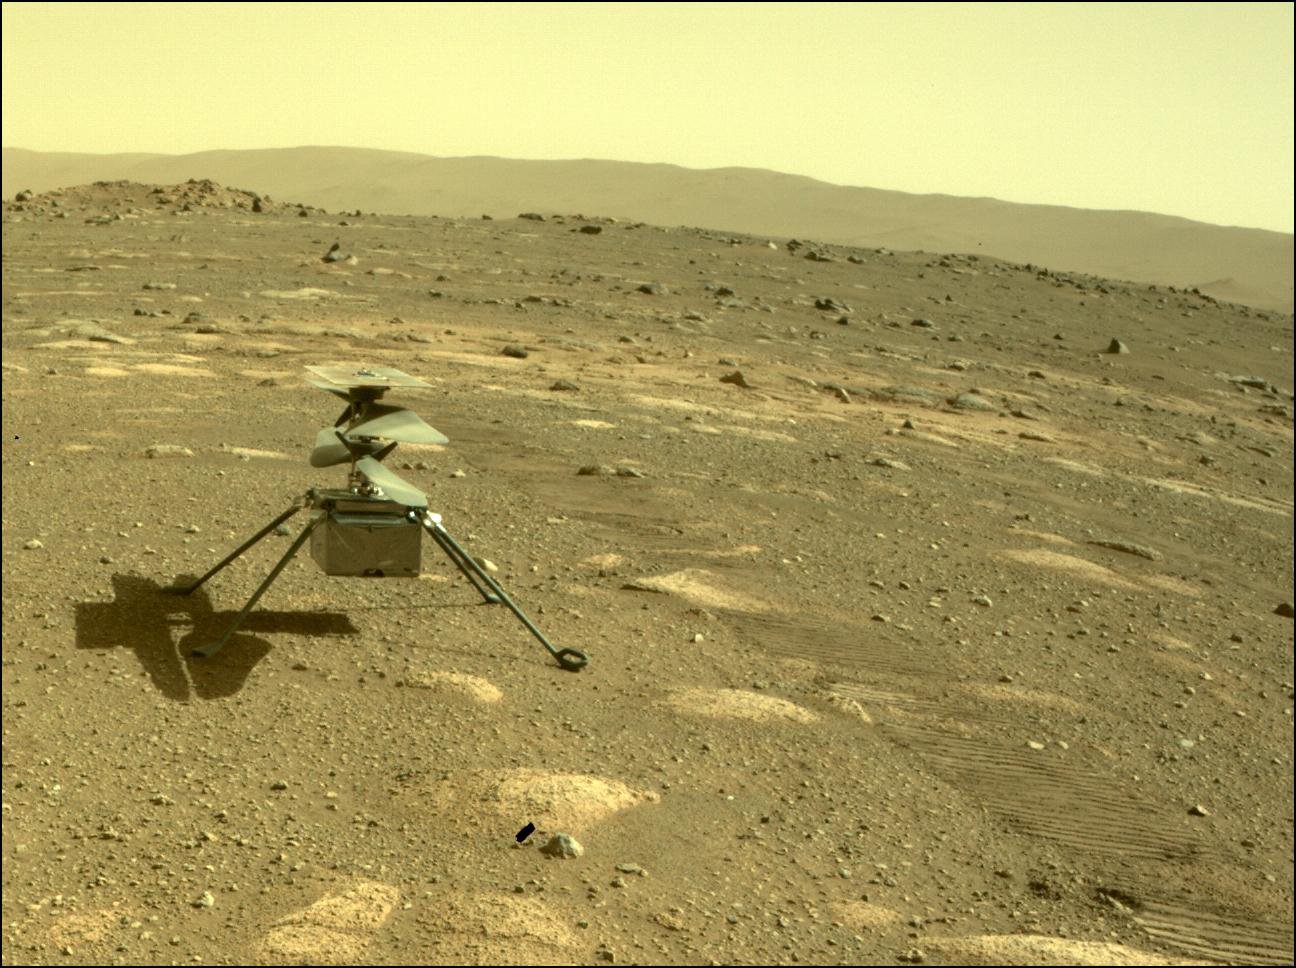 A photograph taken by the Ingenuity helicopter's Perseverance rover on the surface of Mars in April, just after the rover deployed the helicopter.